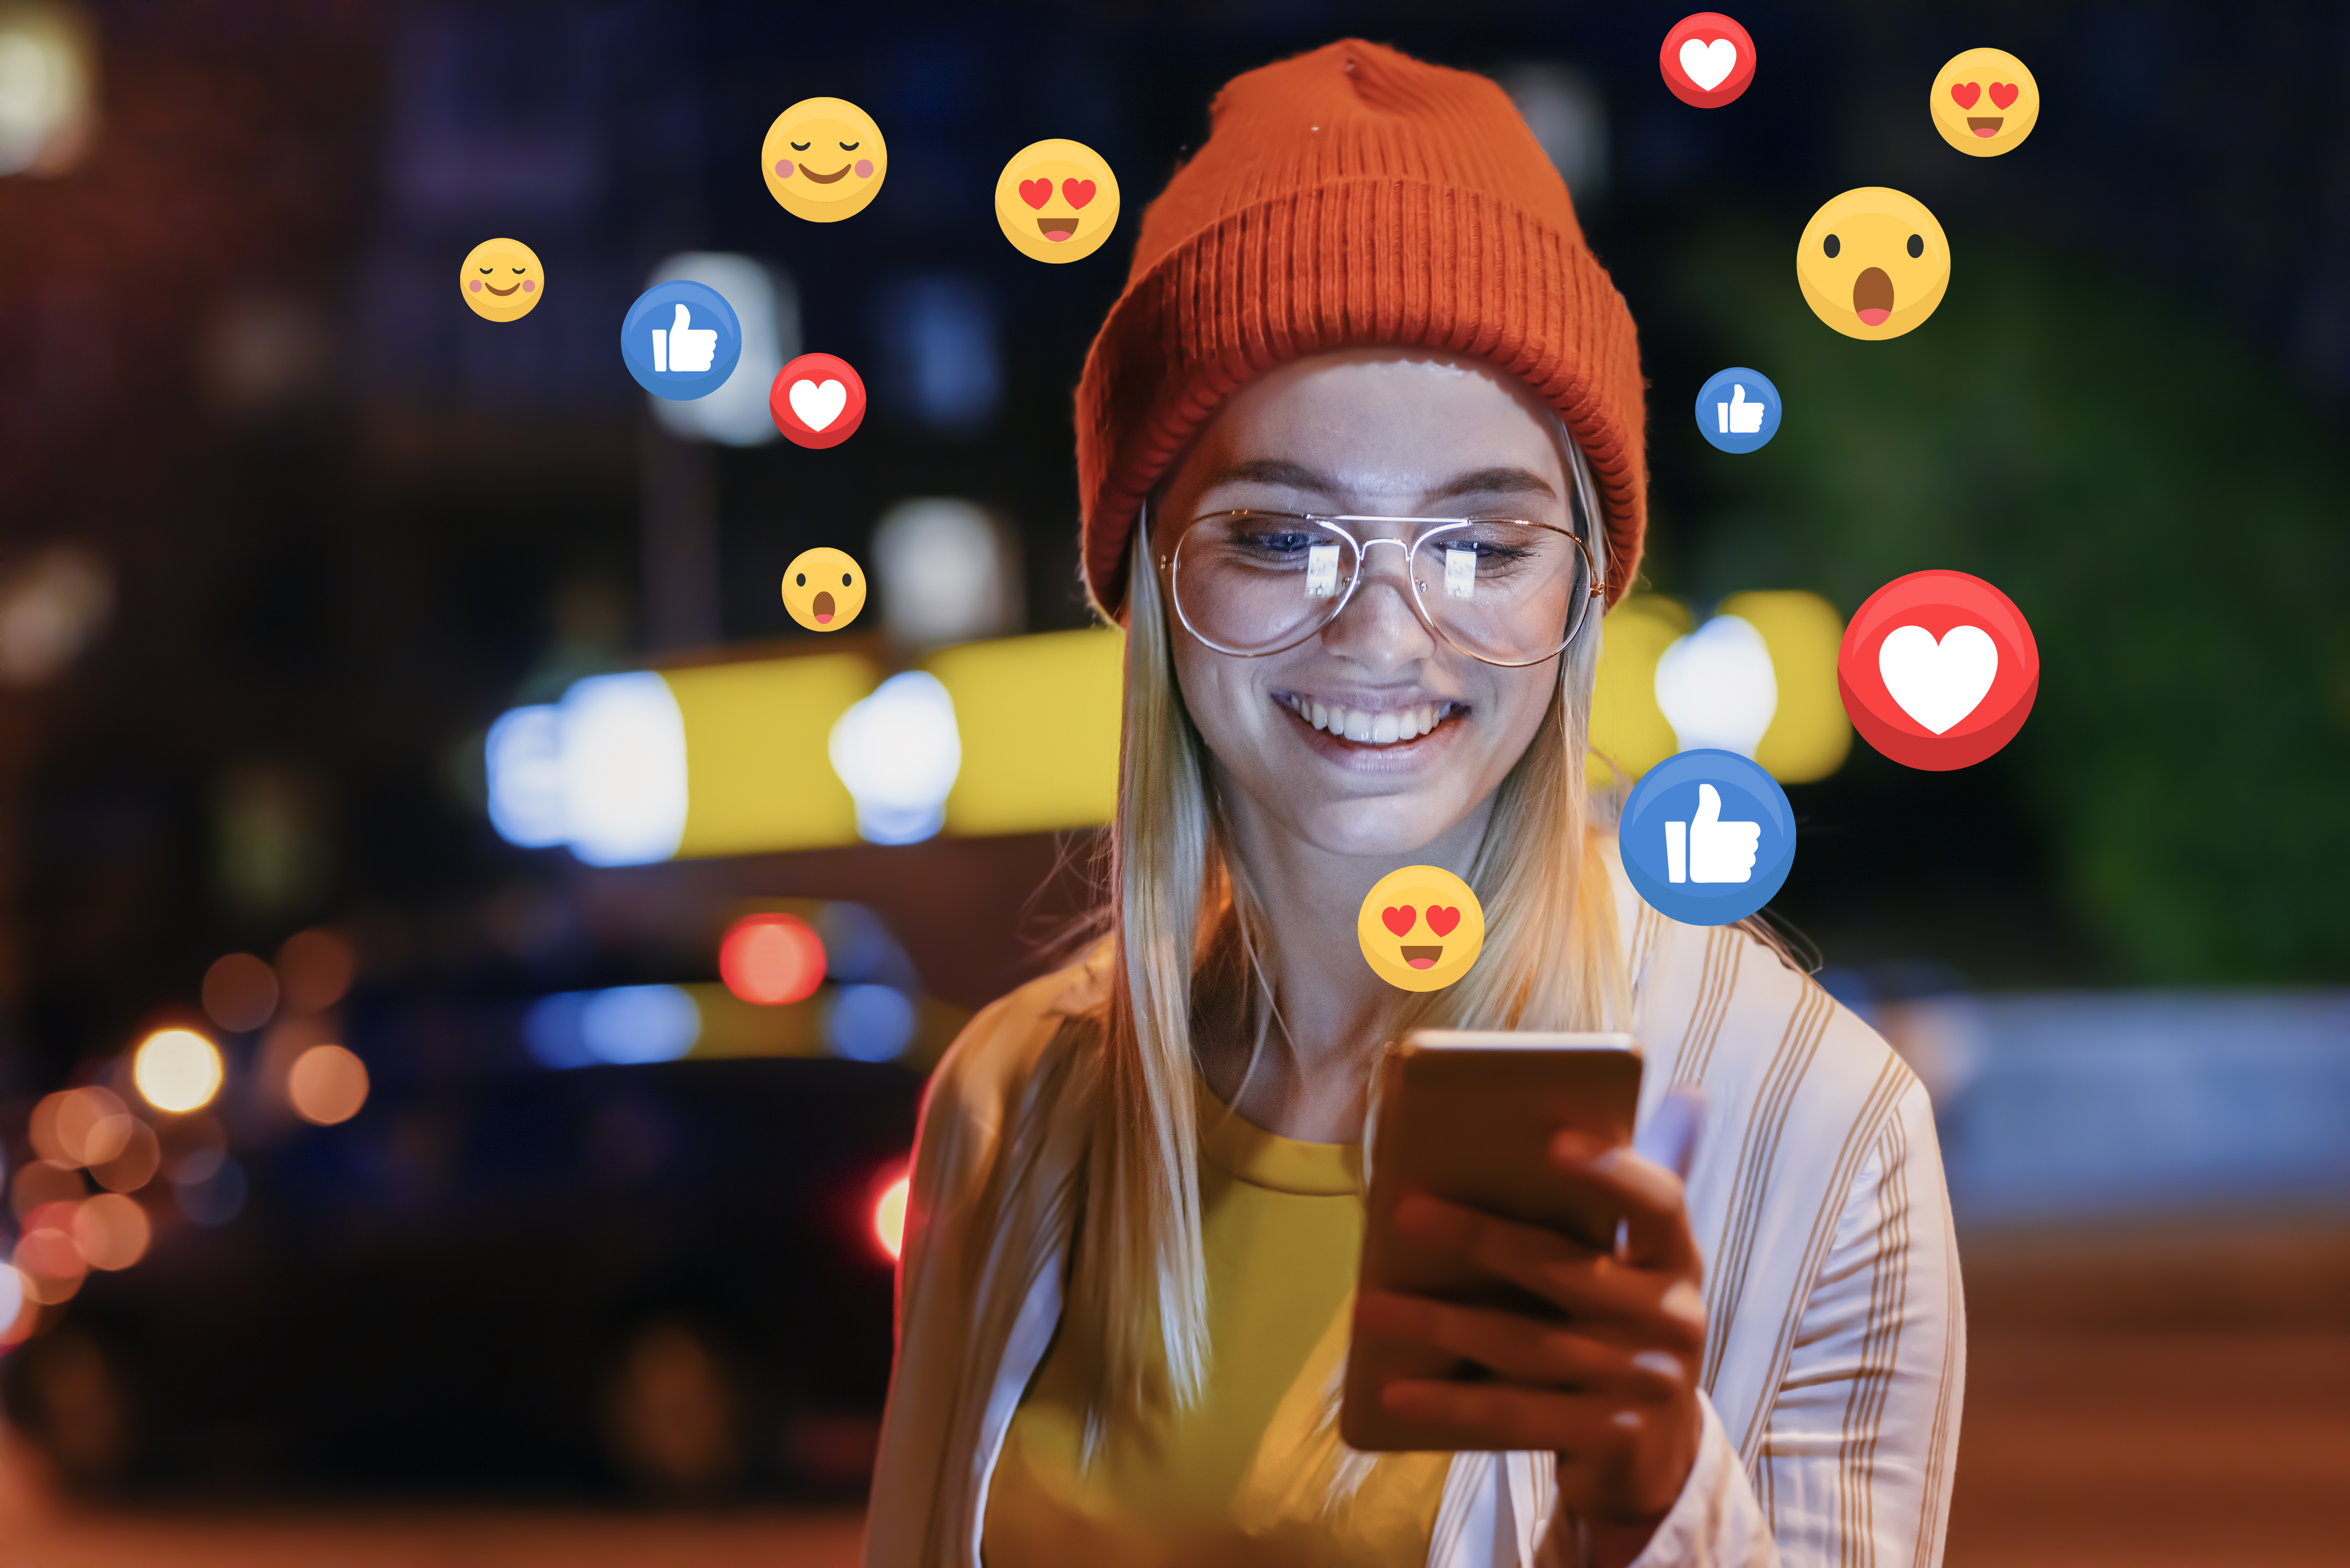 5 Pro Tips for Using Facebook to Promote Your Business in 2020